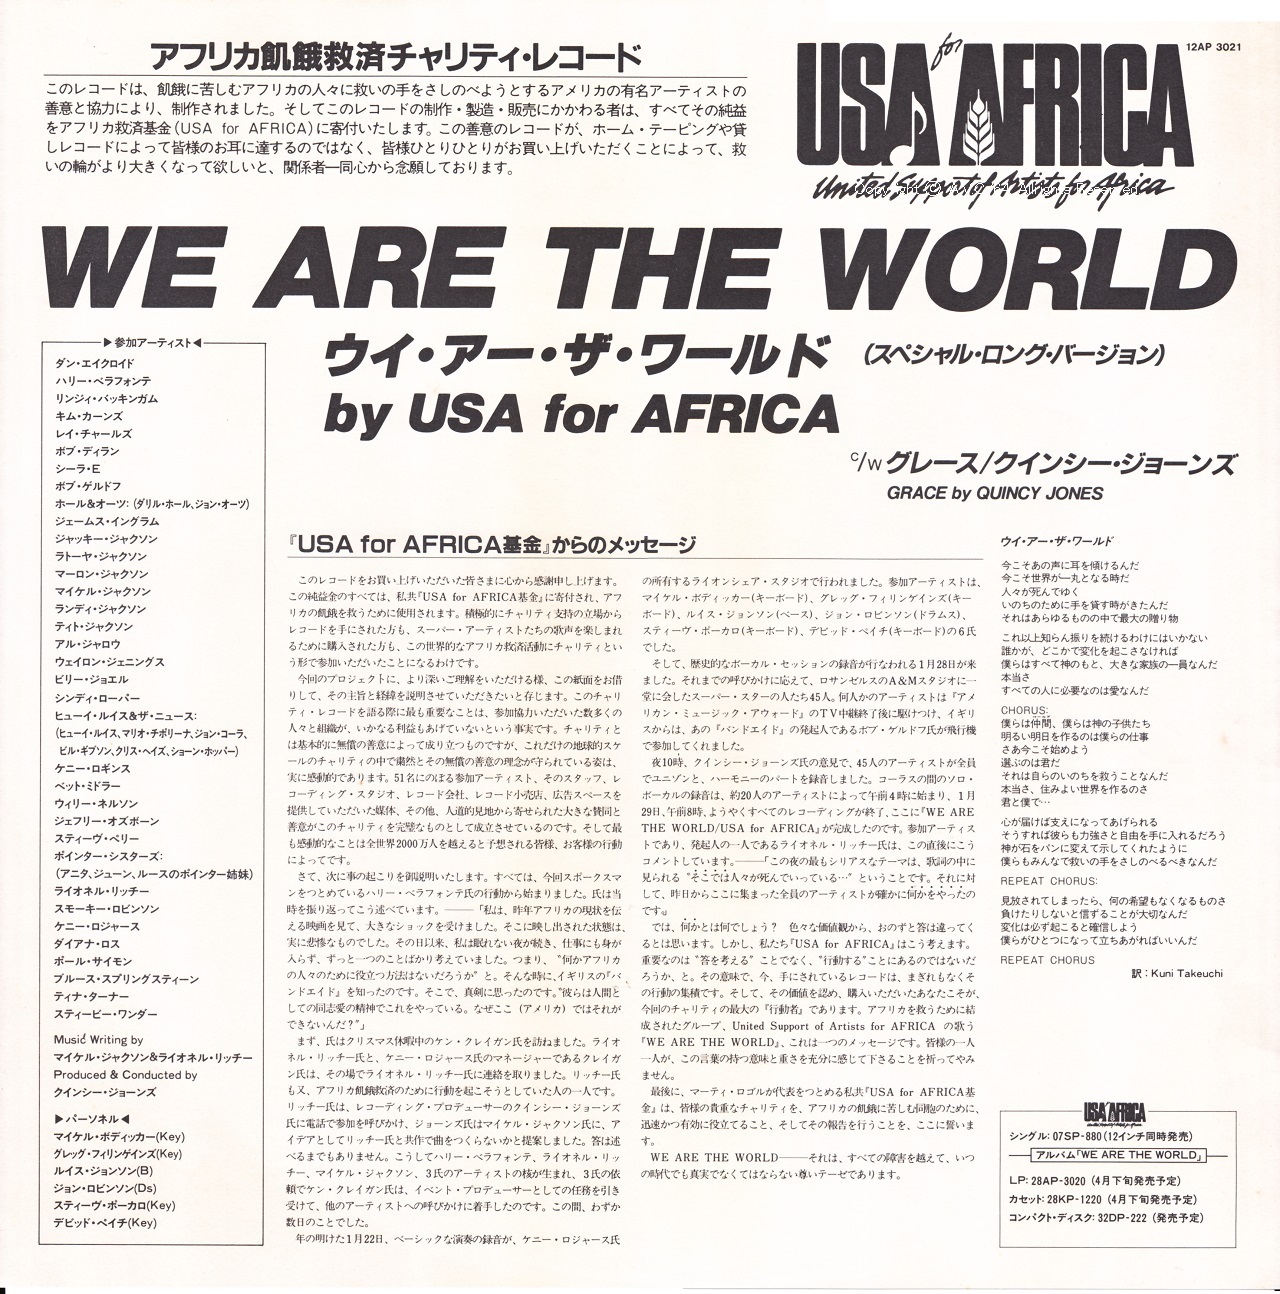 WE ARE THE WORLD-SPECIAL LONG VERSION-2